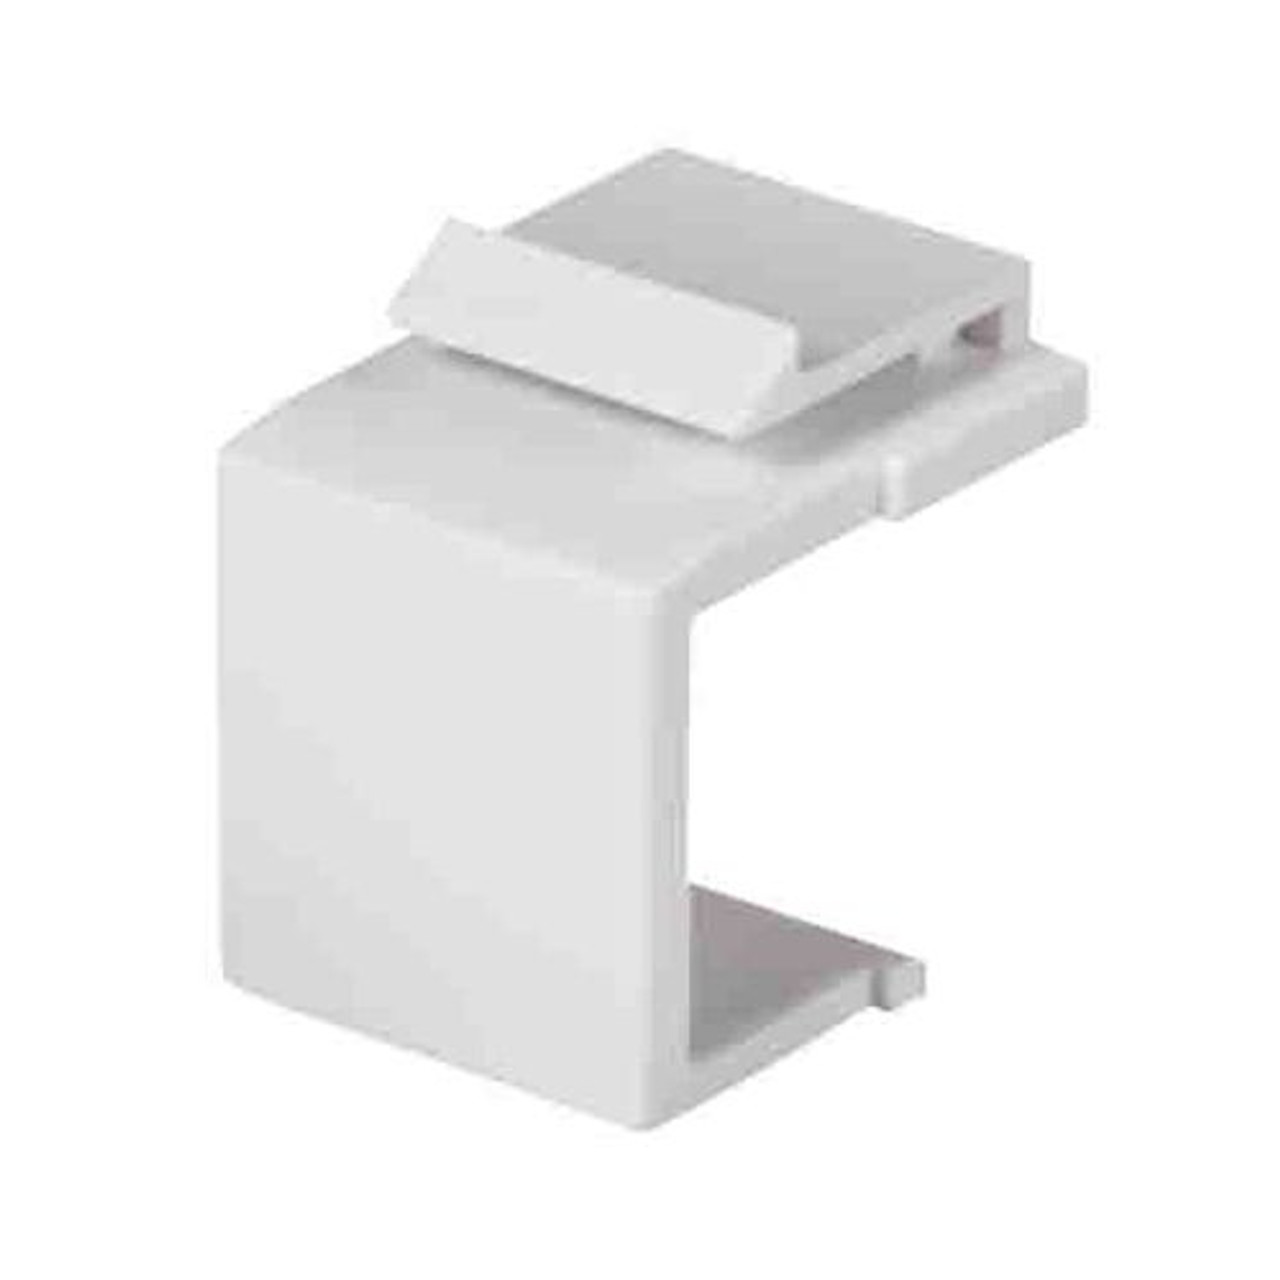 Steren 310-420WH-10 Blank Keystone Insert 10 Pack White Wall Plate QuickPort Plug 1 Pack Flush Mount Snap-In Modules, Audio Video Data Junction Box Snap-In Network Jack, Single Pack, Part # 310-420-WH-10